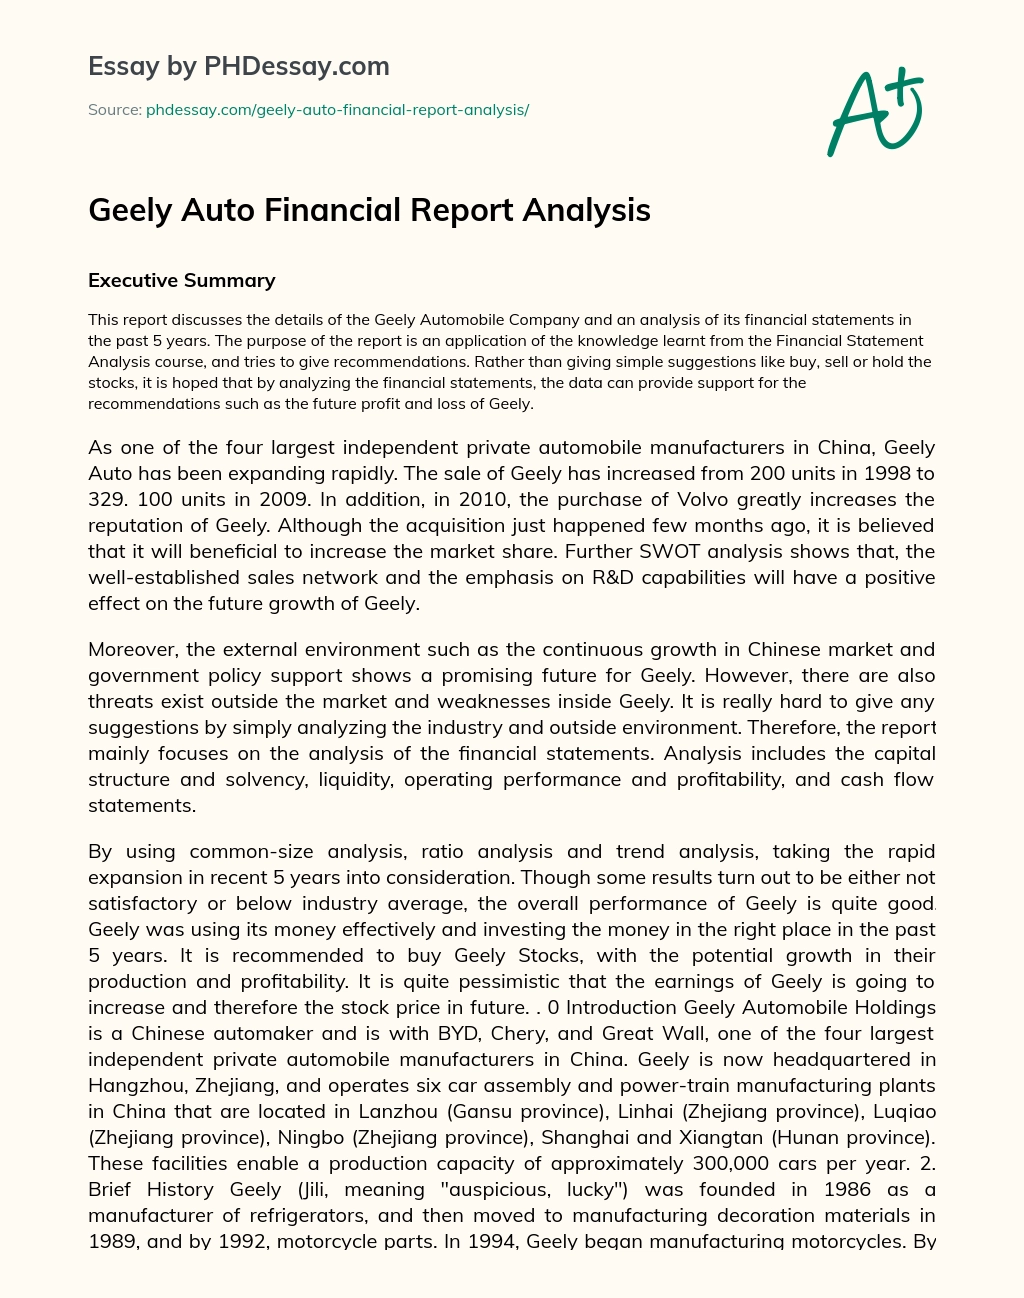 Geely Auto Financial Report Analysis essay